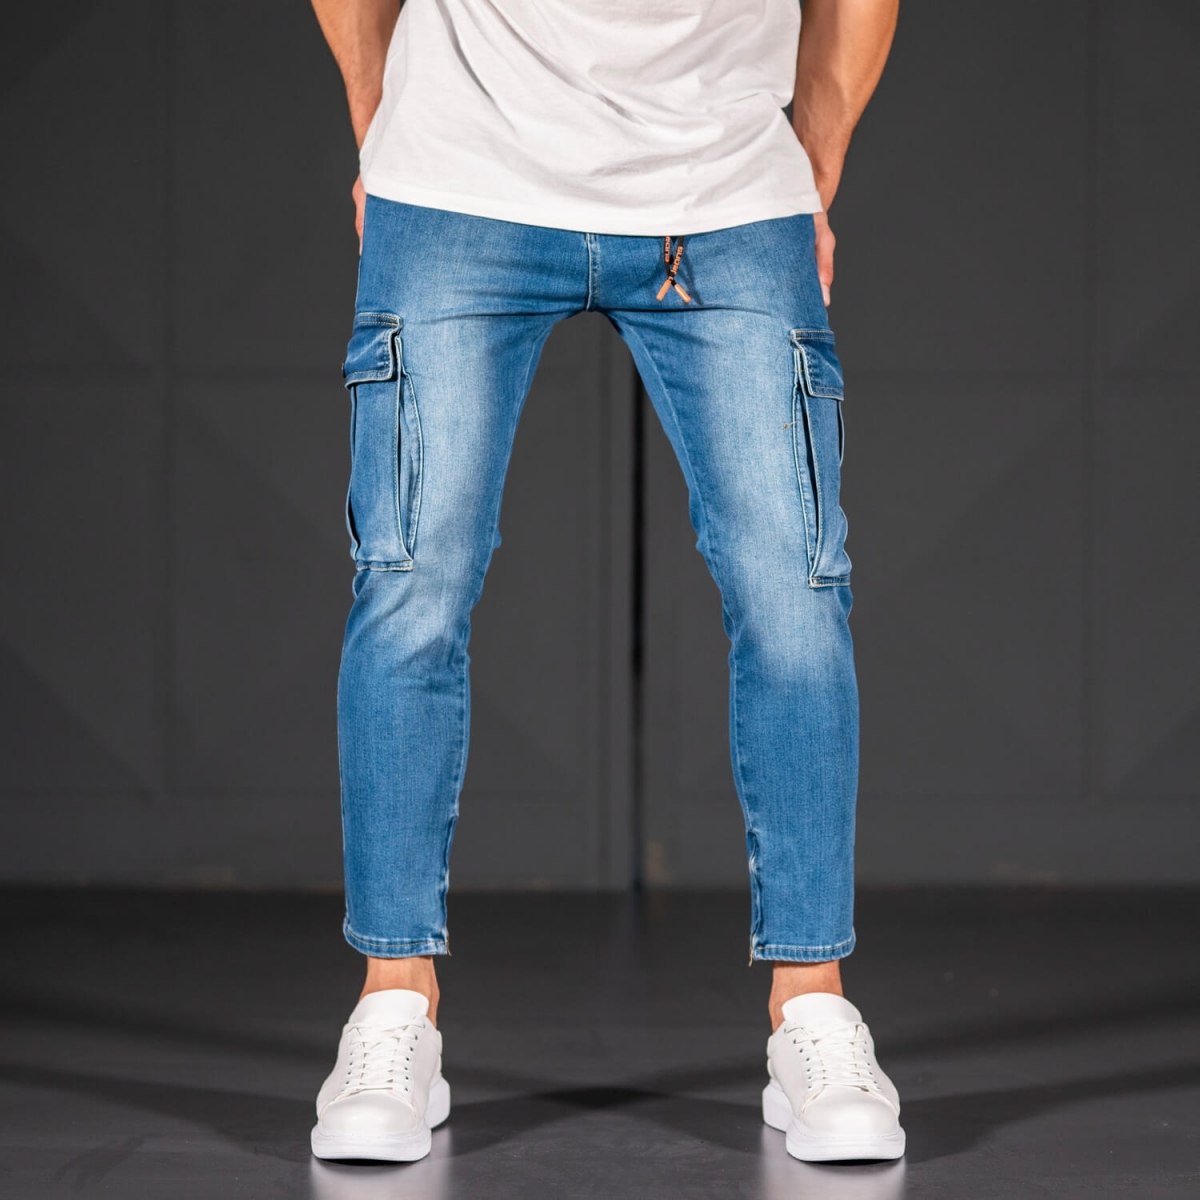 Men's Jeans with Pockets Style in Ocean Blue